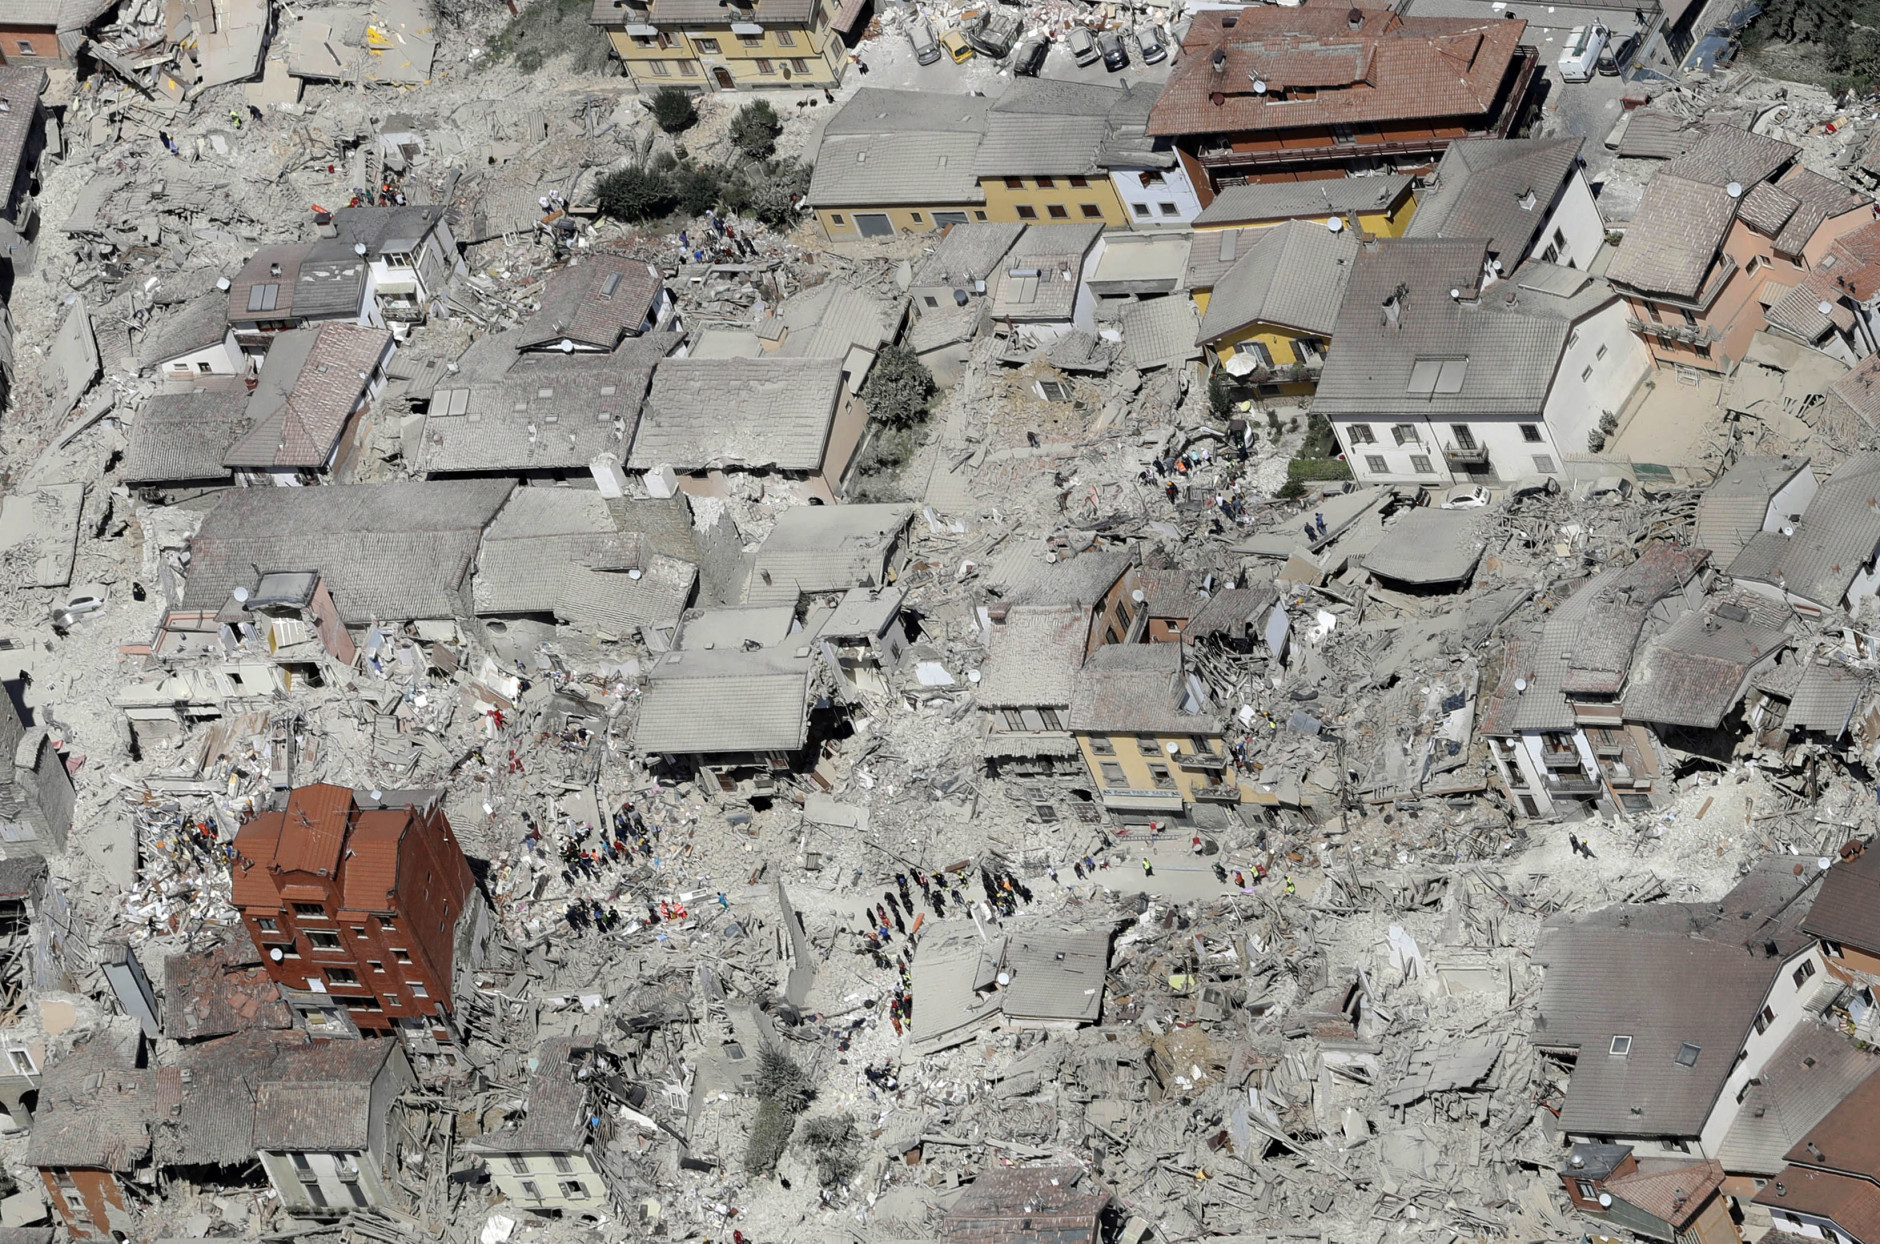 This aerial photo shows the damaged buildings in the town of Amatrice, central Italy, after an earthquake, Wednesday, Aug. 24, 2016. The magnitude 6 quake struck at 3:36 a.m. (0136 GMT) and was felt across a broad swath of central Italy, including Rome where residents of the capital felt a long swaying followed by aftershocks. (AP Photo/Gregorio Borgia)